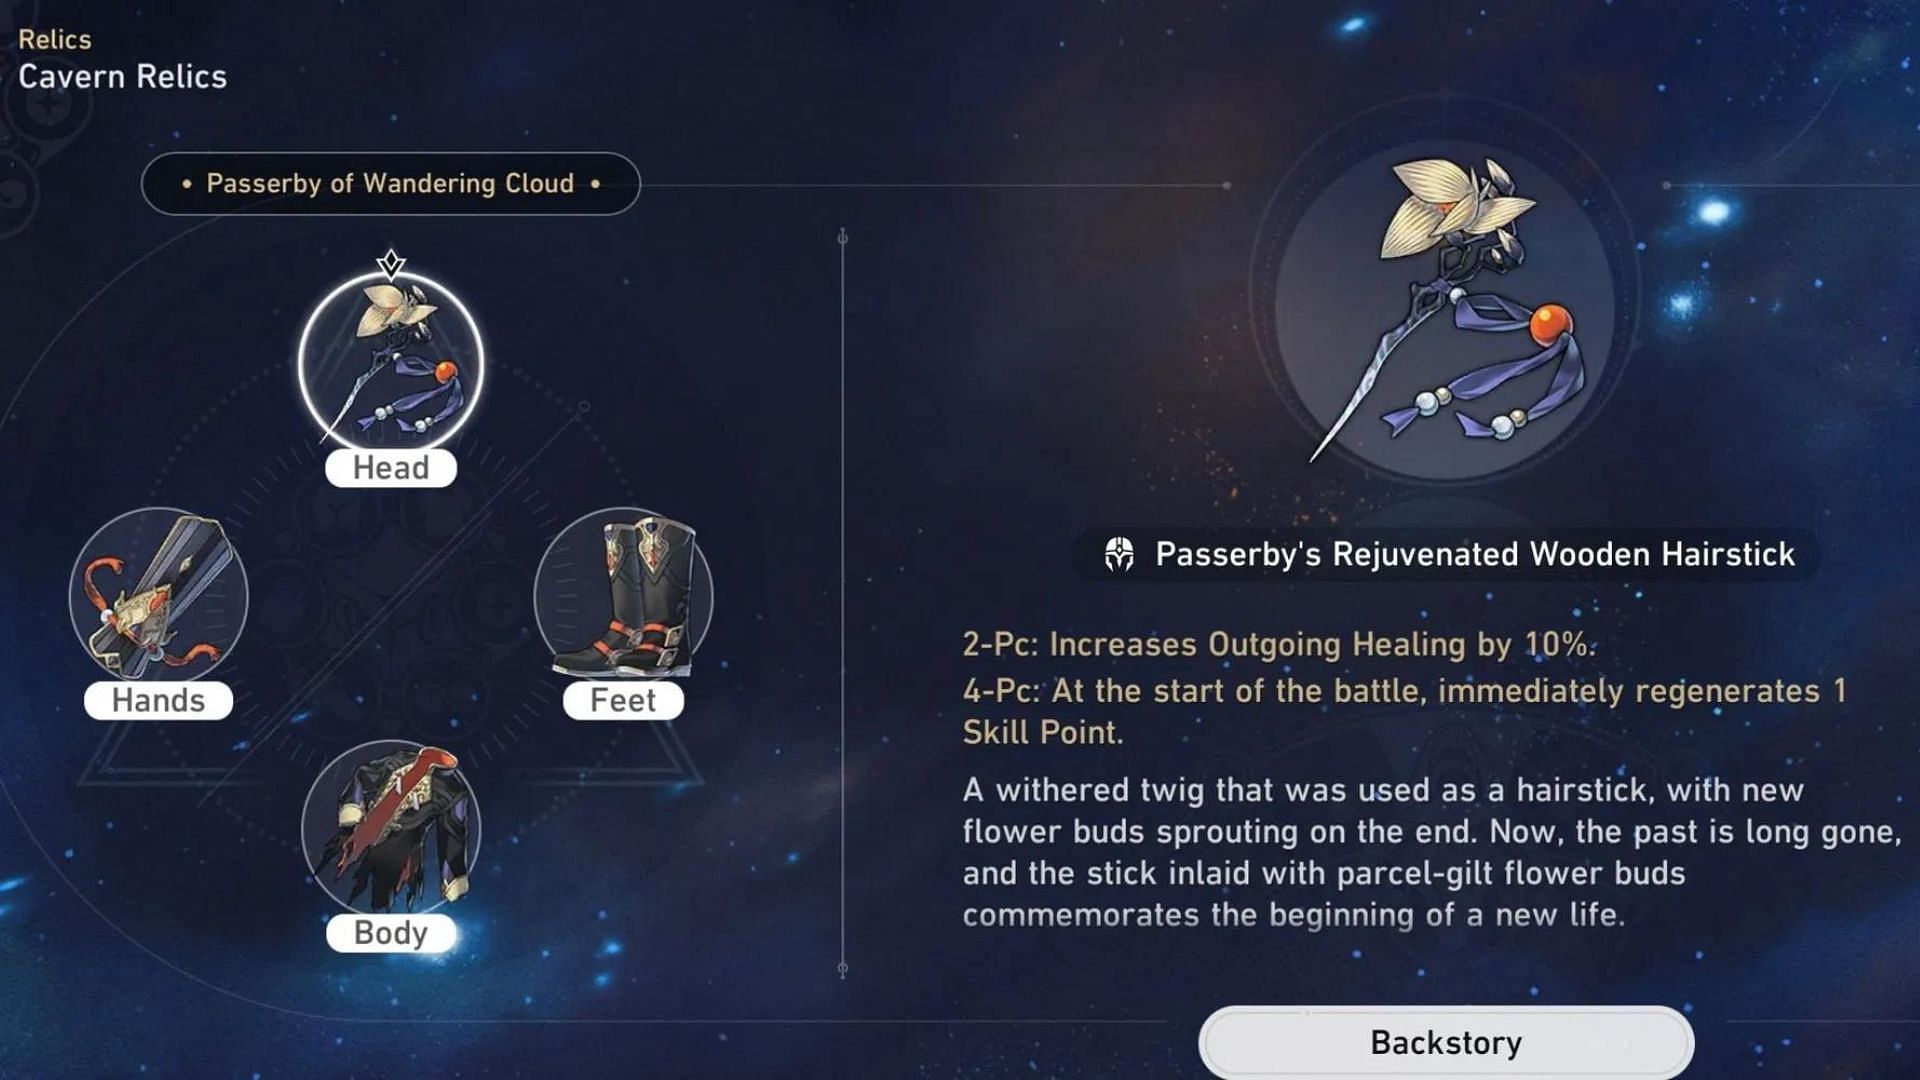 The Passerby of Wandering Cloud Relic Set (Image via HoYoverse)